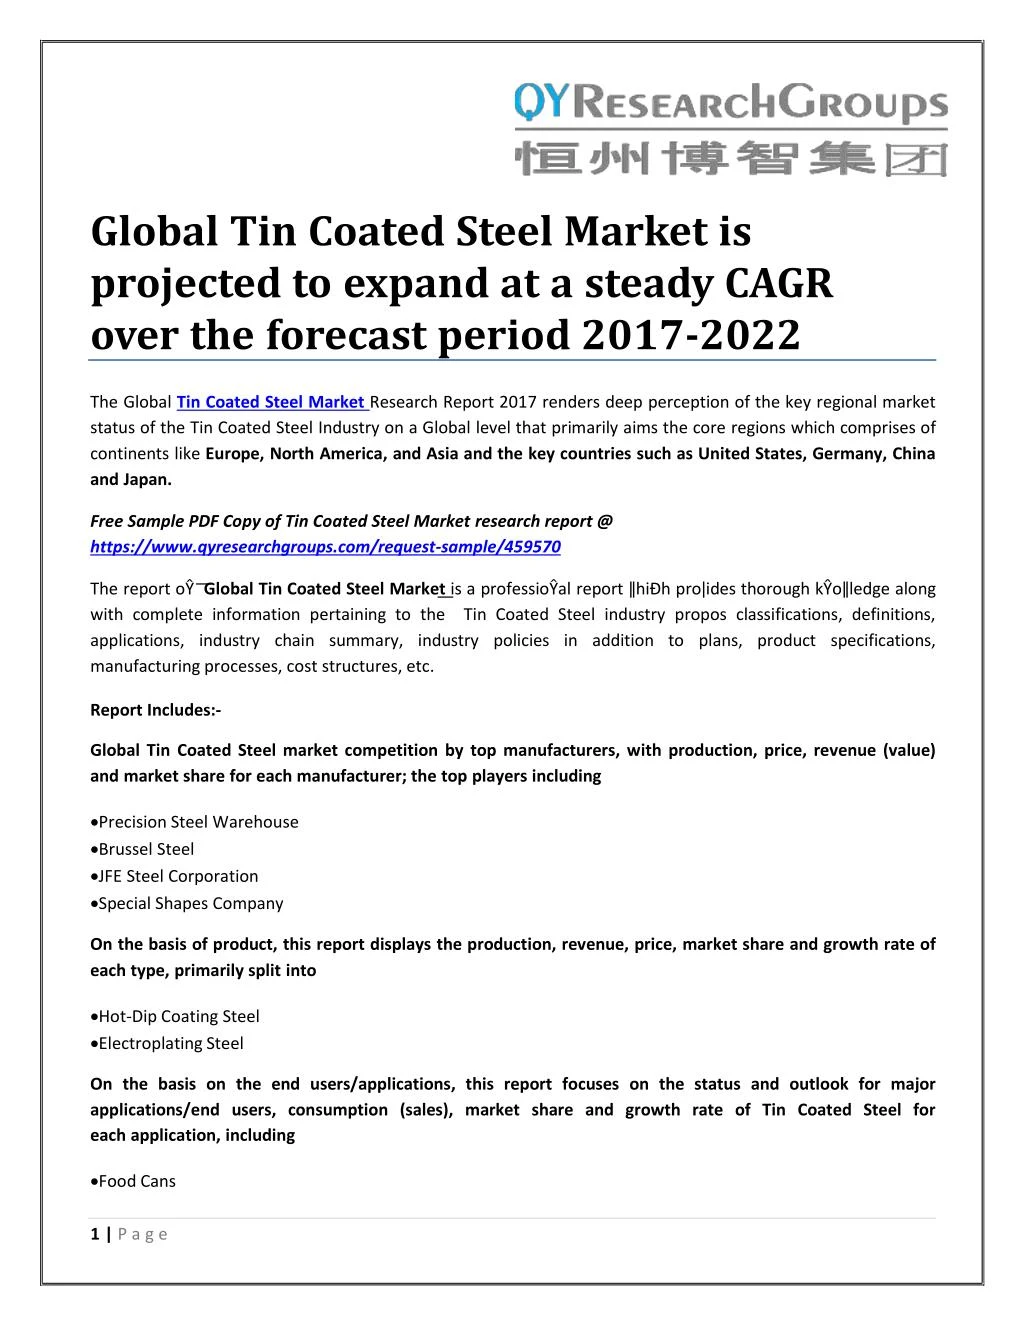 global tin coated steel market is projected